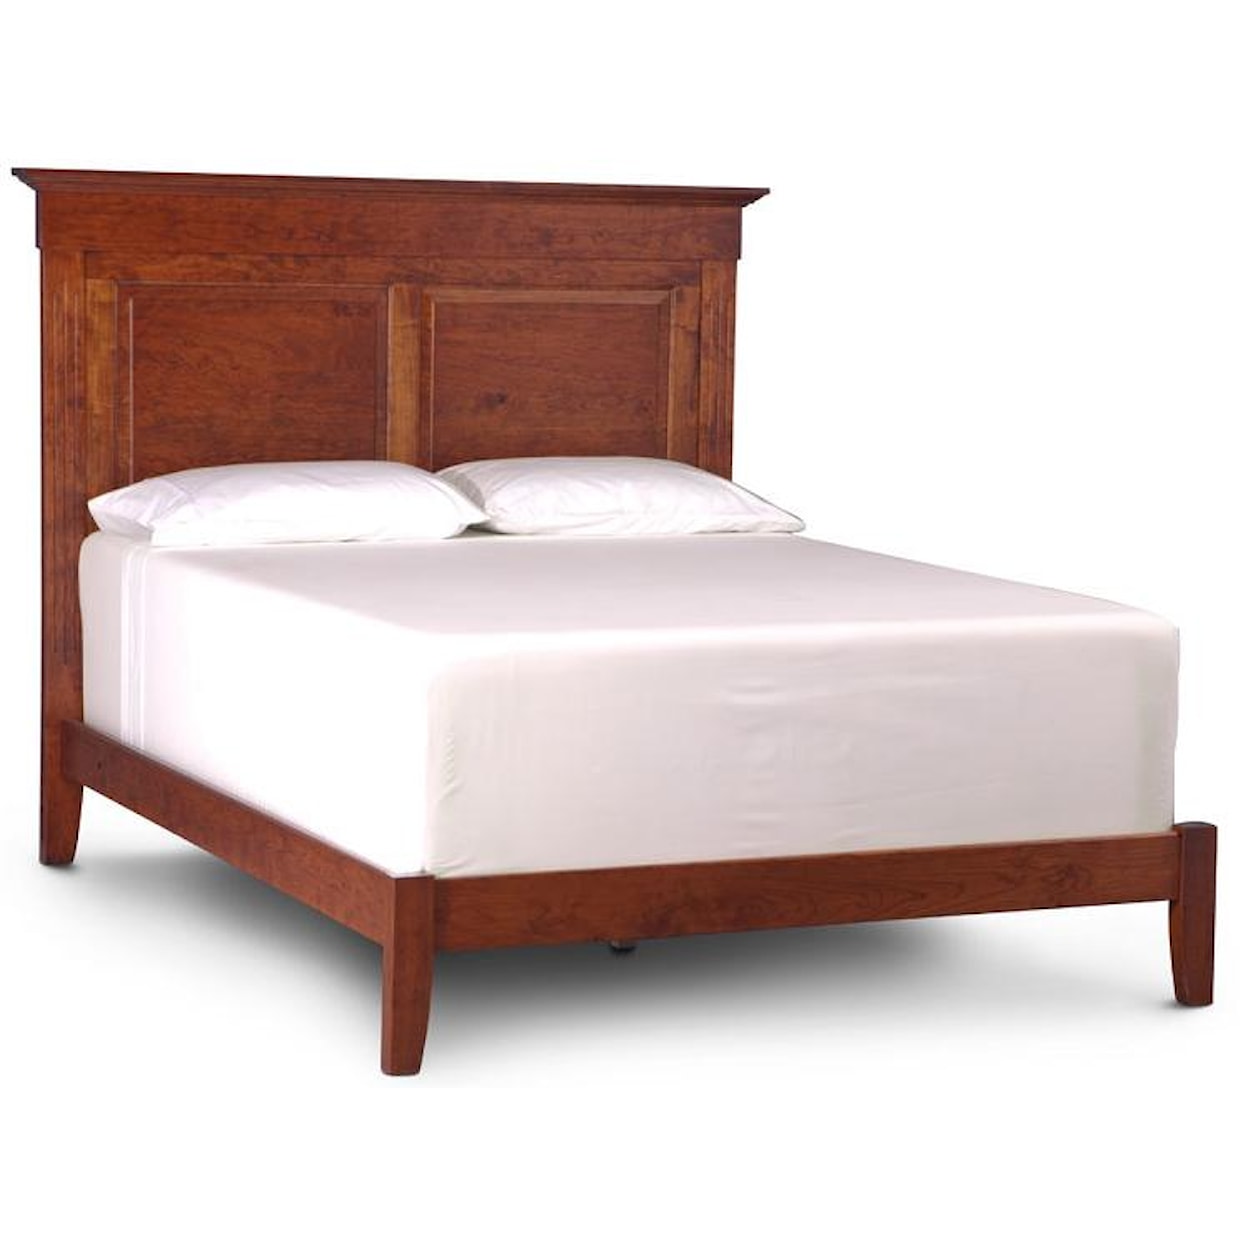 Simply Amish Express King Shenandoah Deluxe Bed with Wood Frame